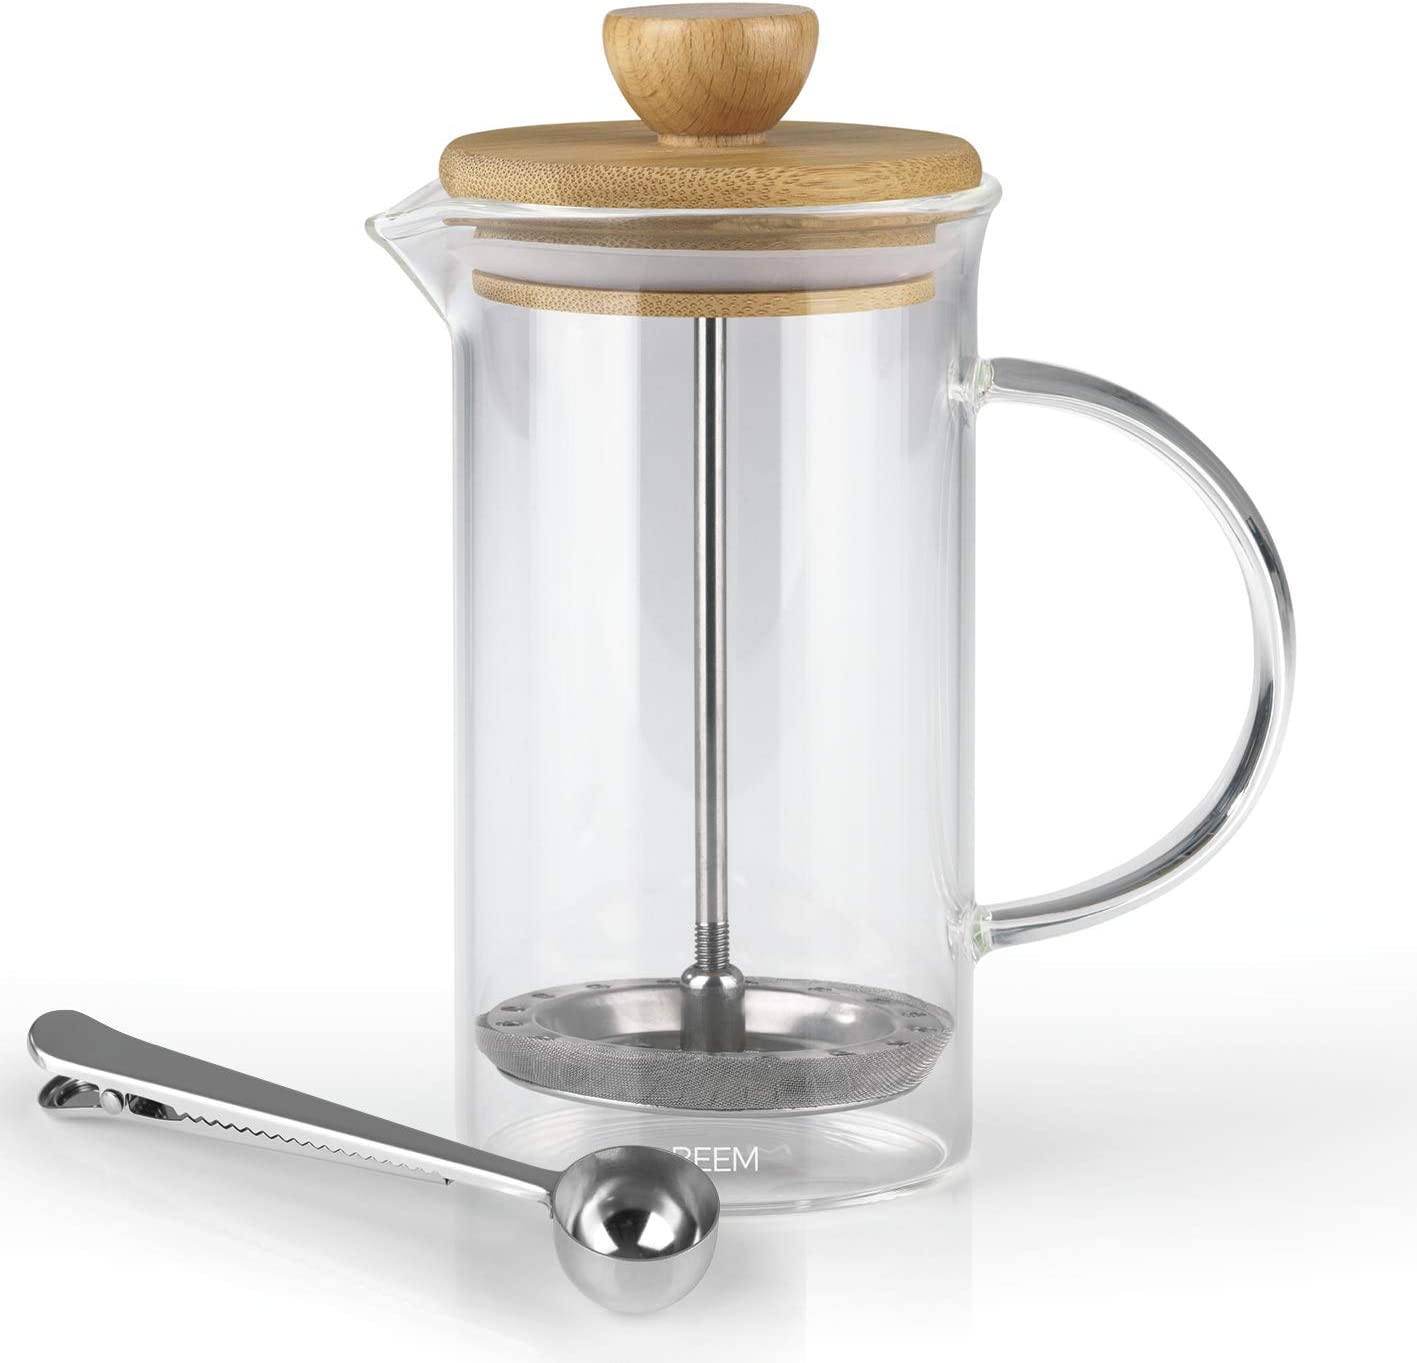 BEEM 5545 Coffee Press Coffee Maker - 0.35 L for 44230 Cups | French Press | Small Coffee Press with Dosing Spoon | Glass Jug with Bamboo Lid and Stainless Steel Filter